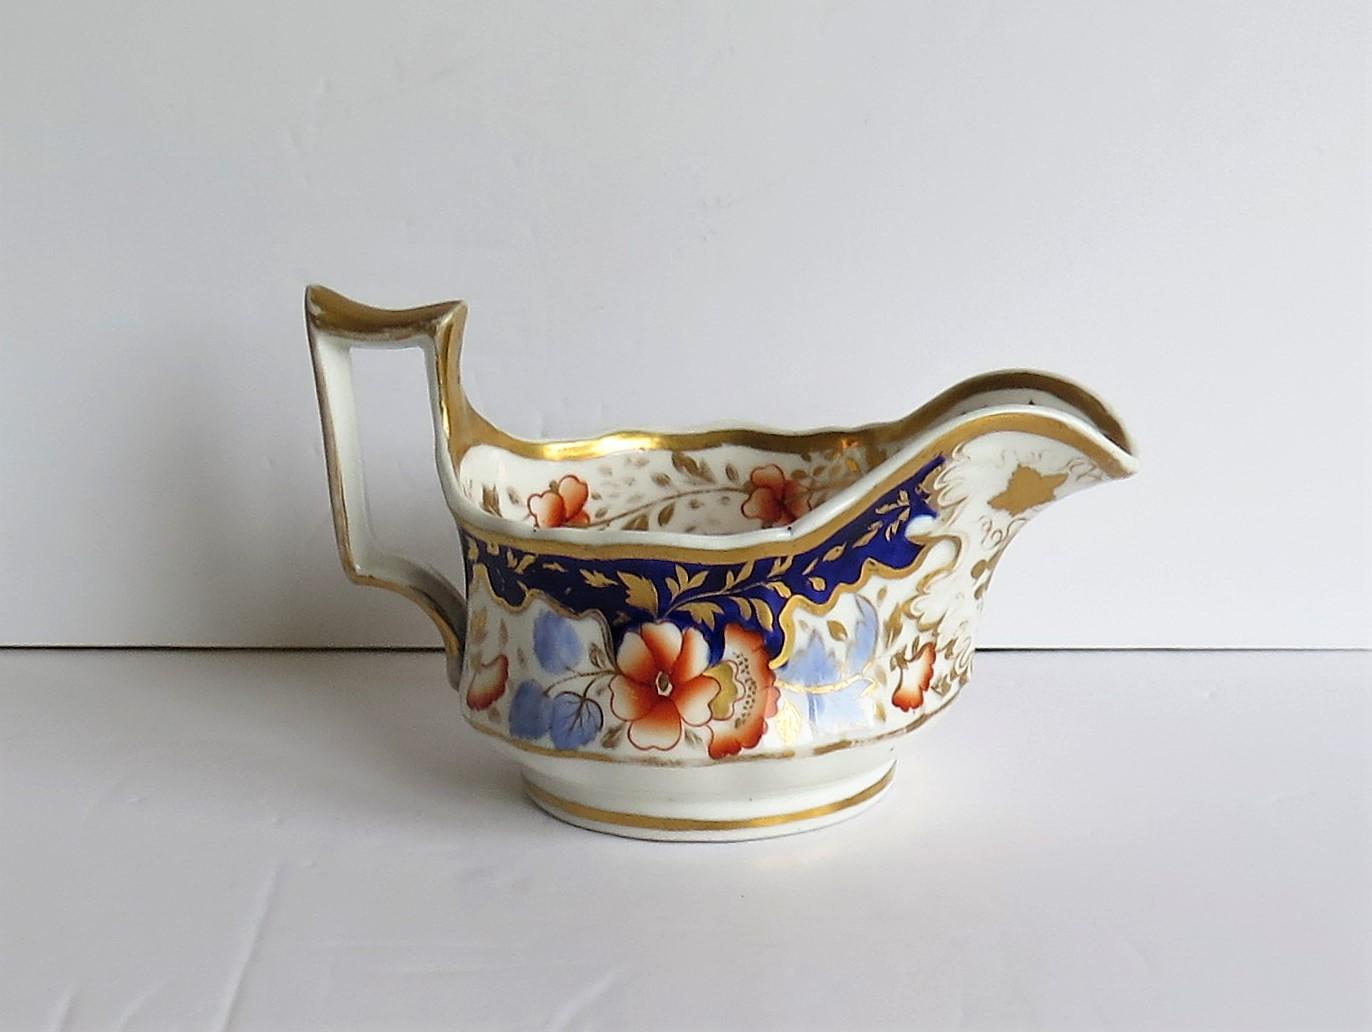 This is a very decorative, porcelain milk jug or creamer in the early Grecian shape, made by John and William Ridgway, of Shelton, Hanley, Staffordshire Potteries, England, dating to the Late Georgian Regency period of the early 19th century, circa